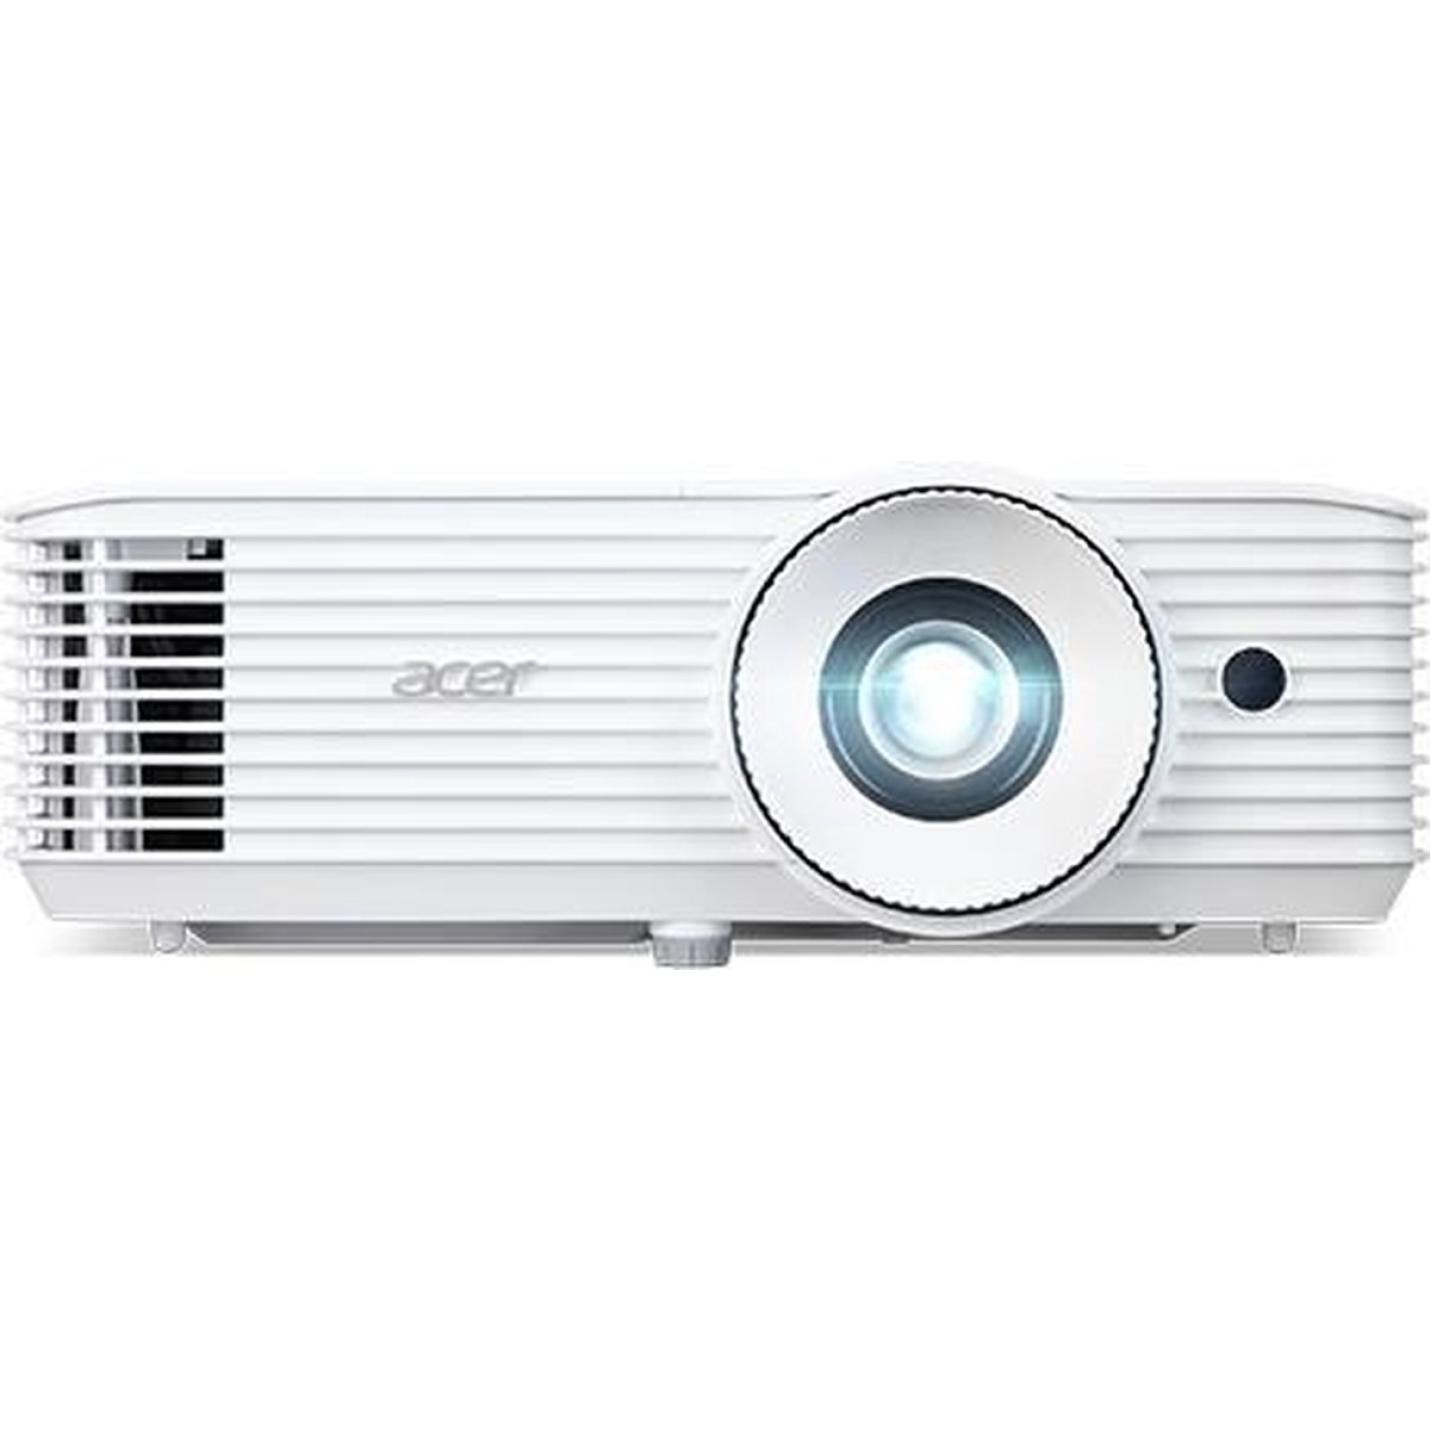 Acer Home H6523BD beamer projector Projector met normale projectieafstand 3500 ANSI lumens DLP 1080p (1920x1080) 3D Wit 2